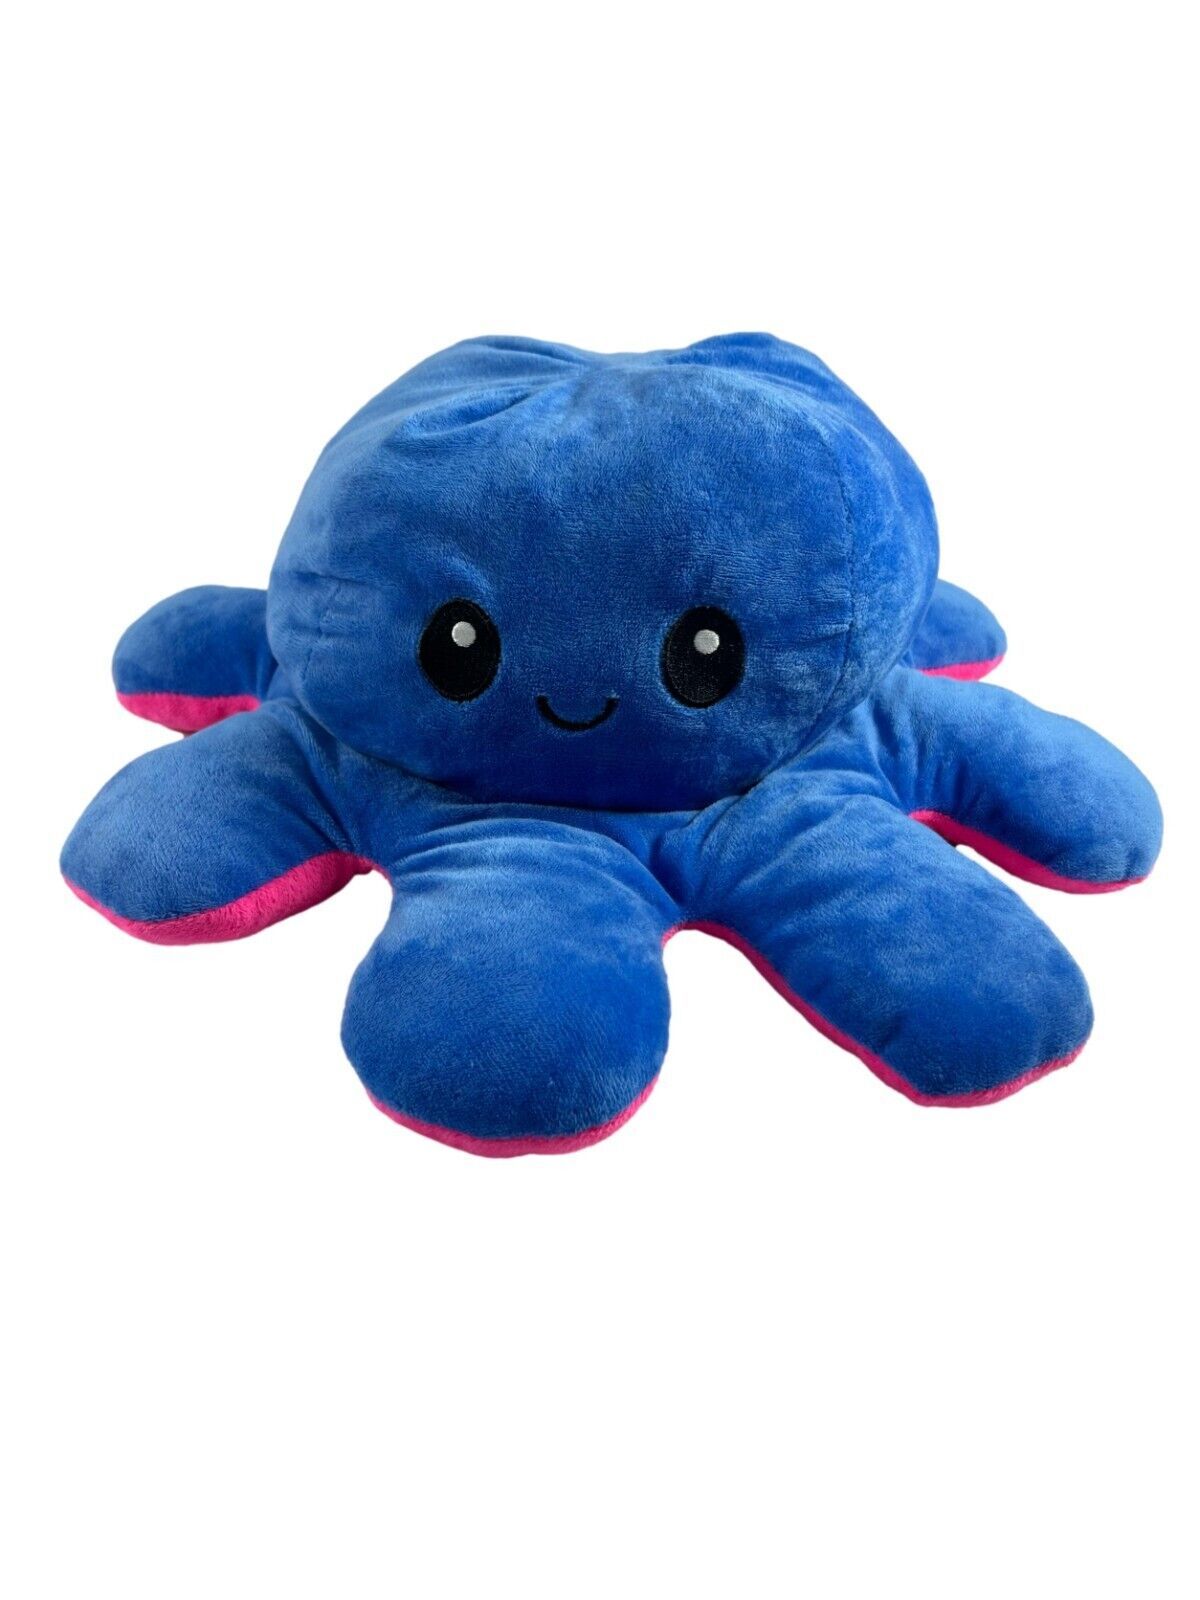 Primary image for TeeTurtle Reversible Octopus Blue Happy Pink Angry Plush Stuffed Animal 6" X 16"